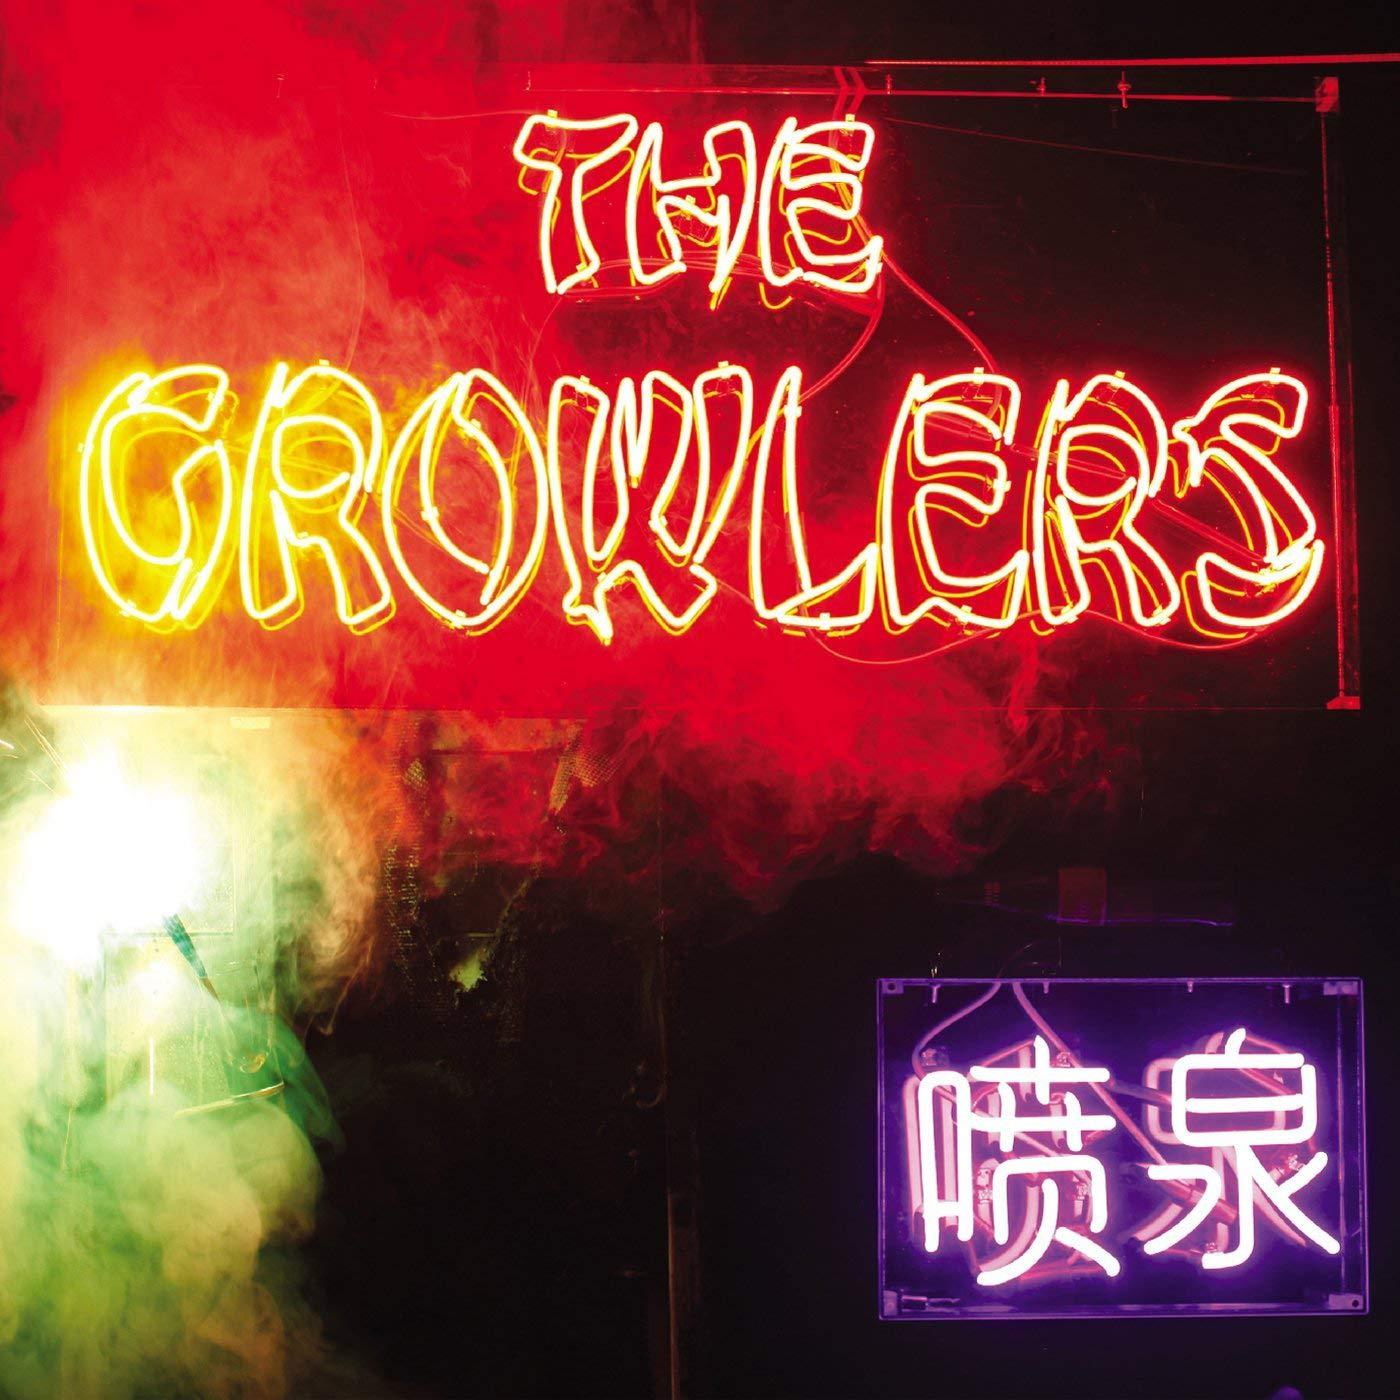 Growlers, the - Chinese Fountain